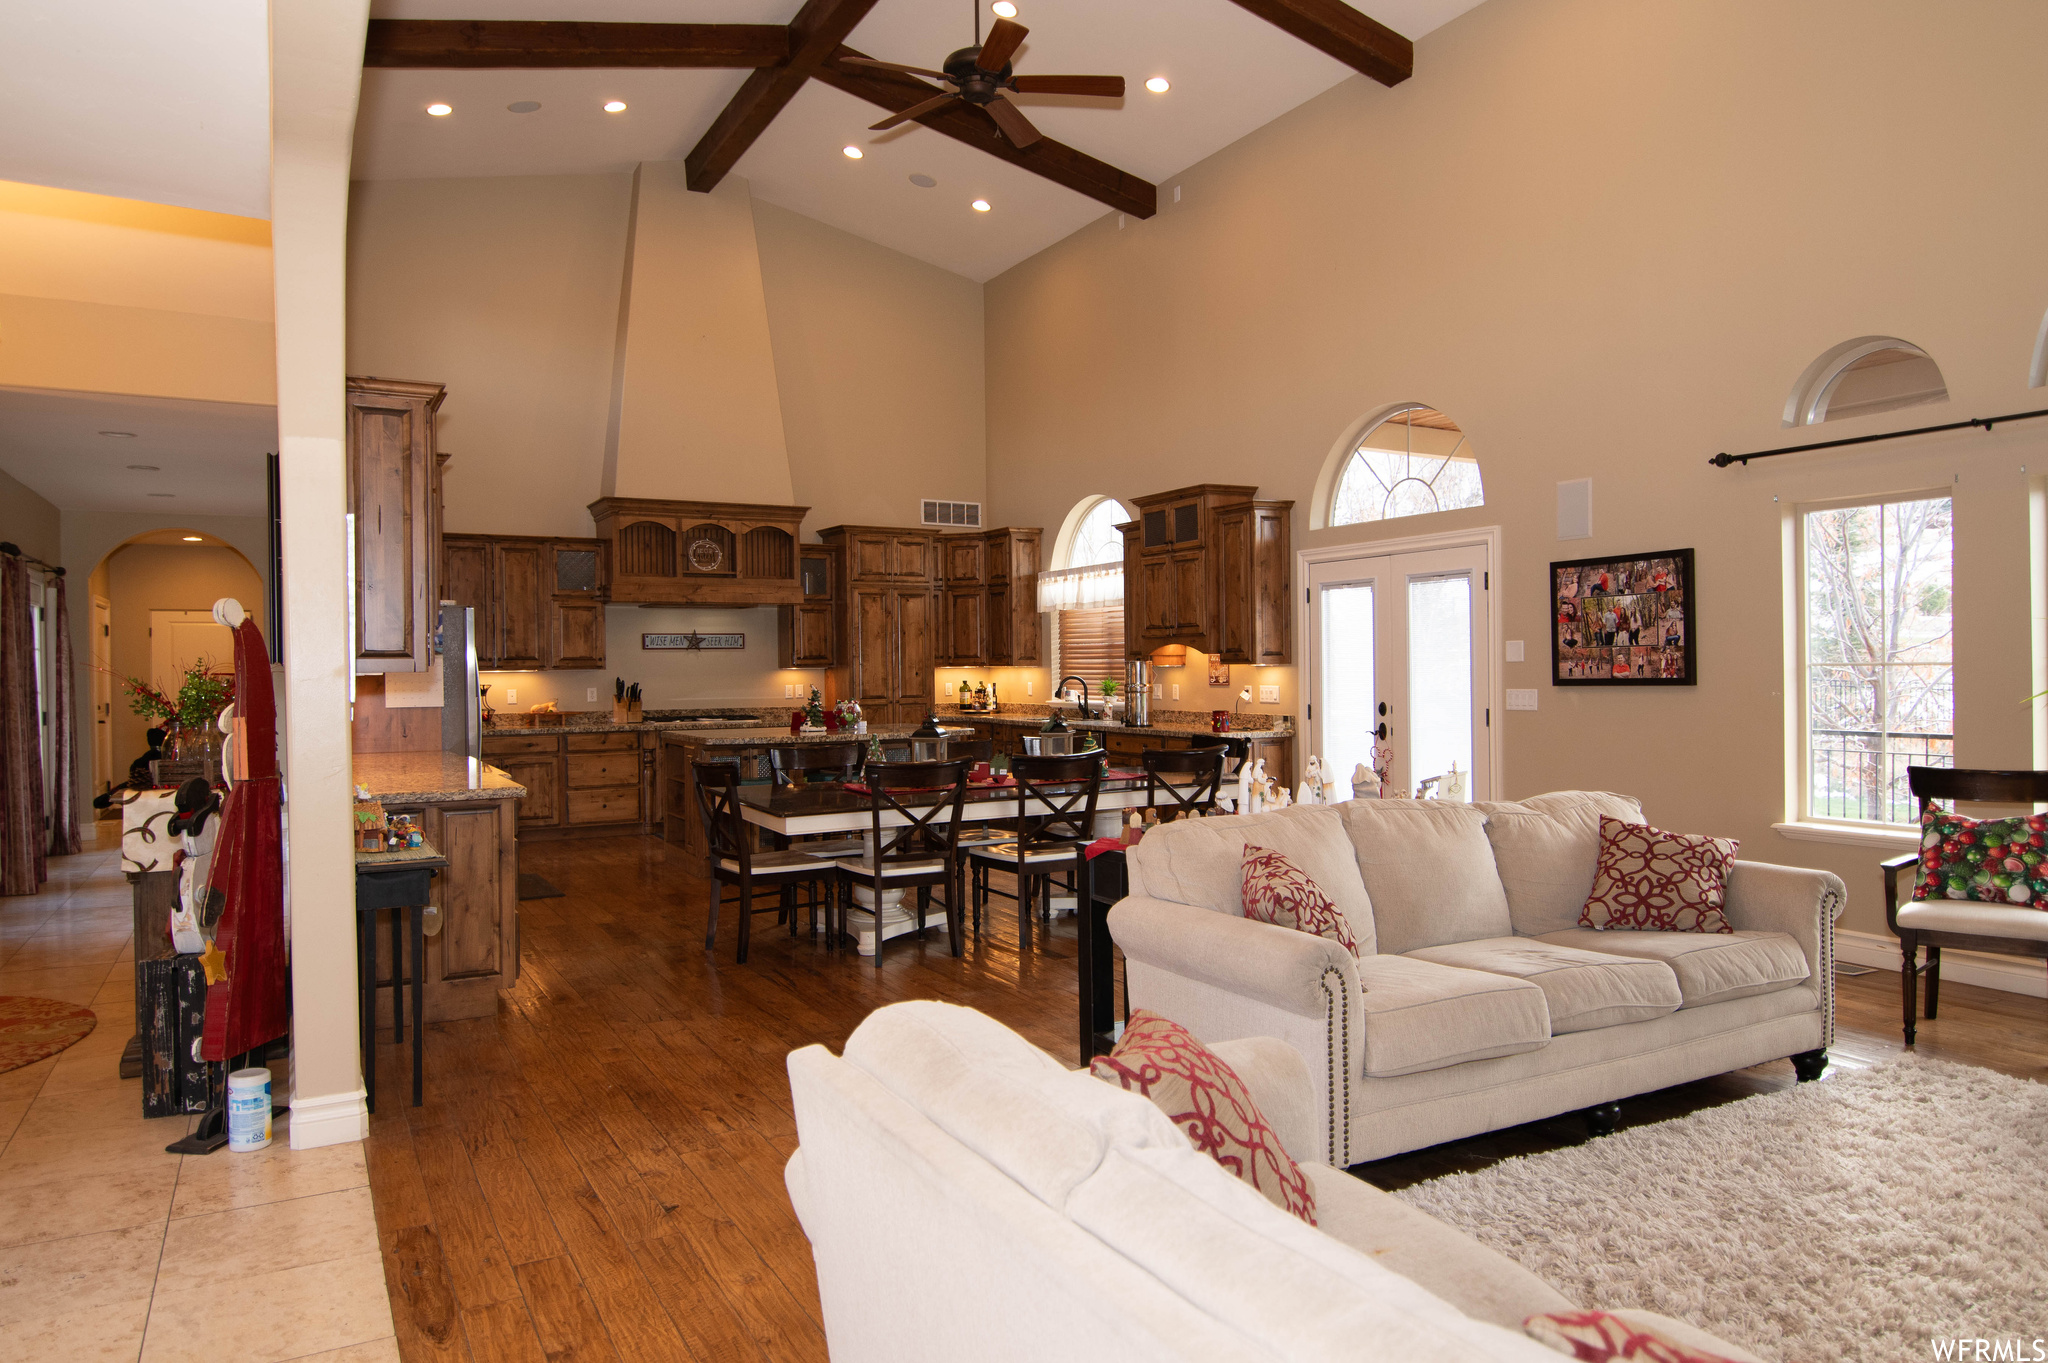 Living room with ceiling fan, beam ceiling, hardwood / wood-style floors, and high vaulted ceiling